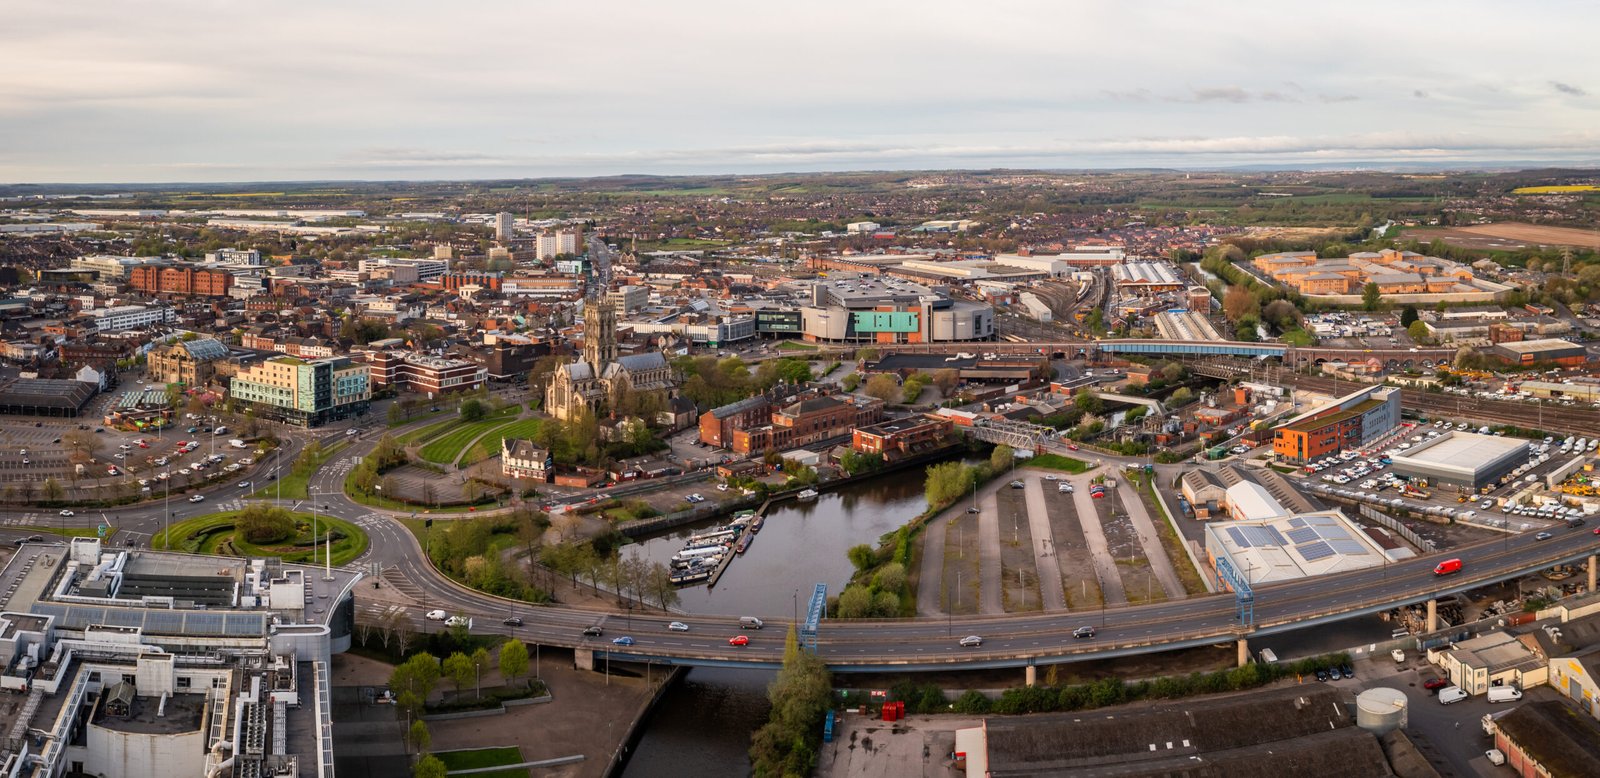 Aerial view of Doncaster city centre with The Minster Church and